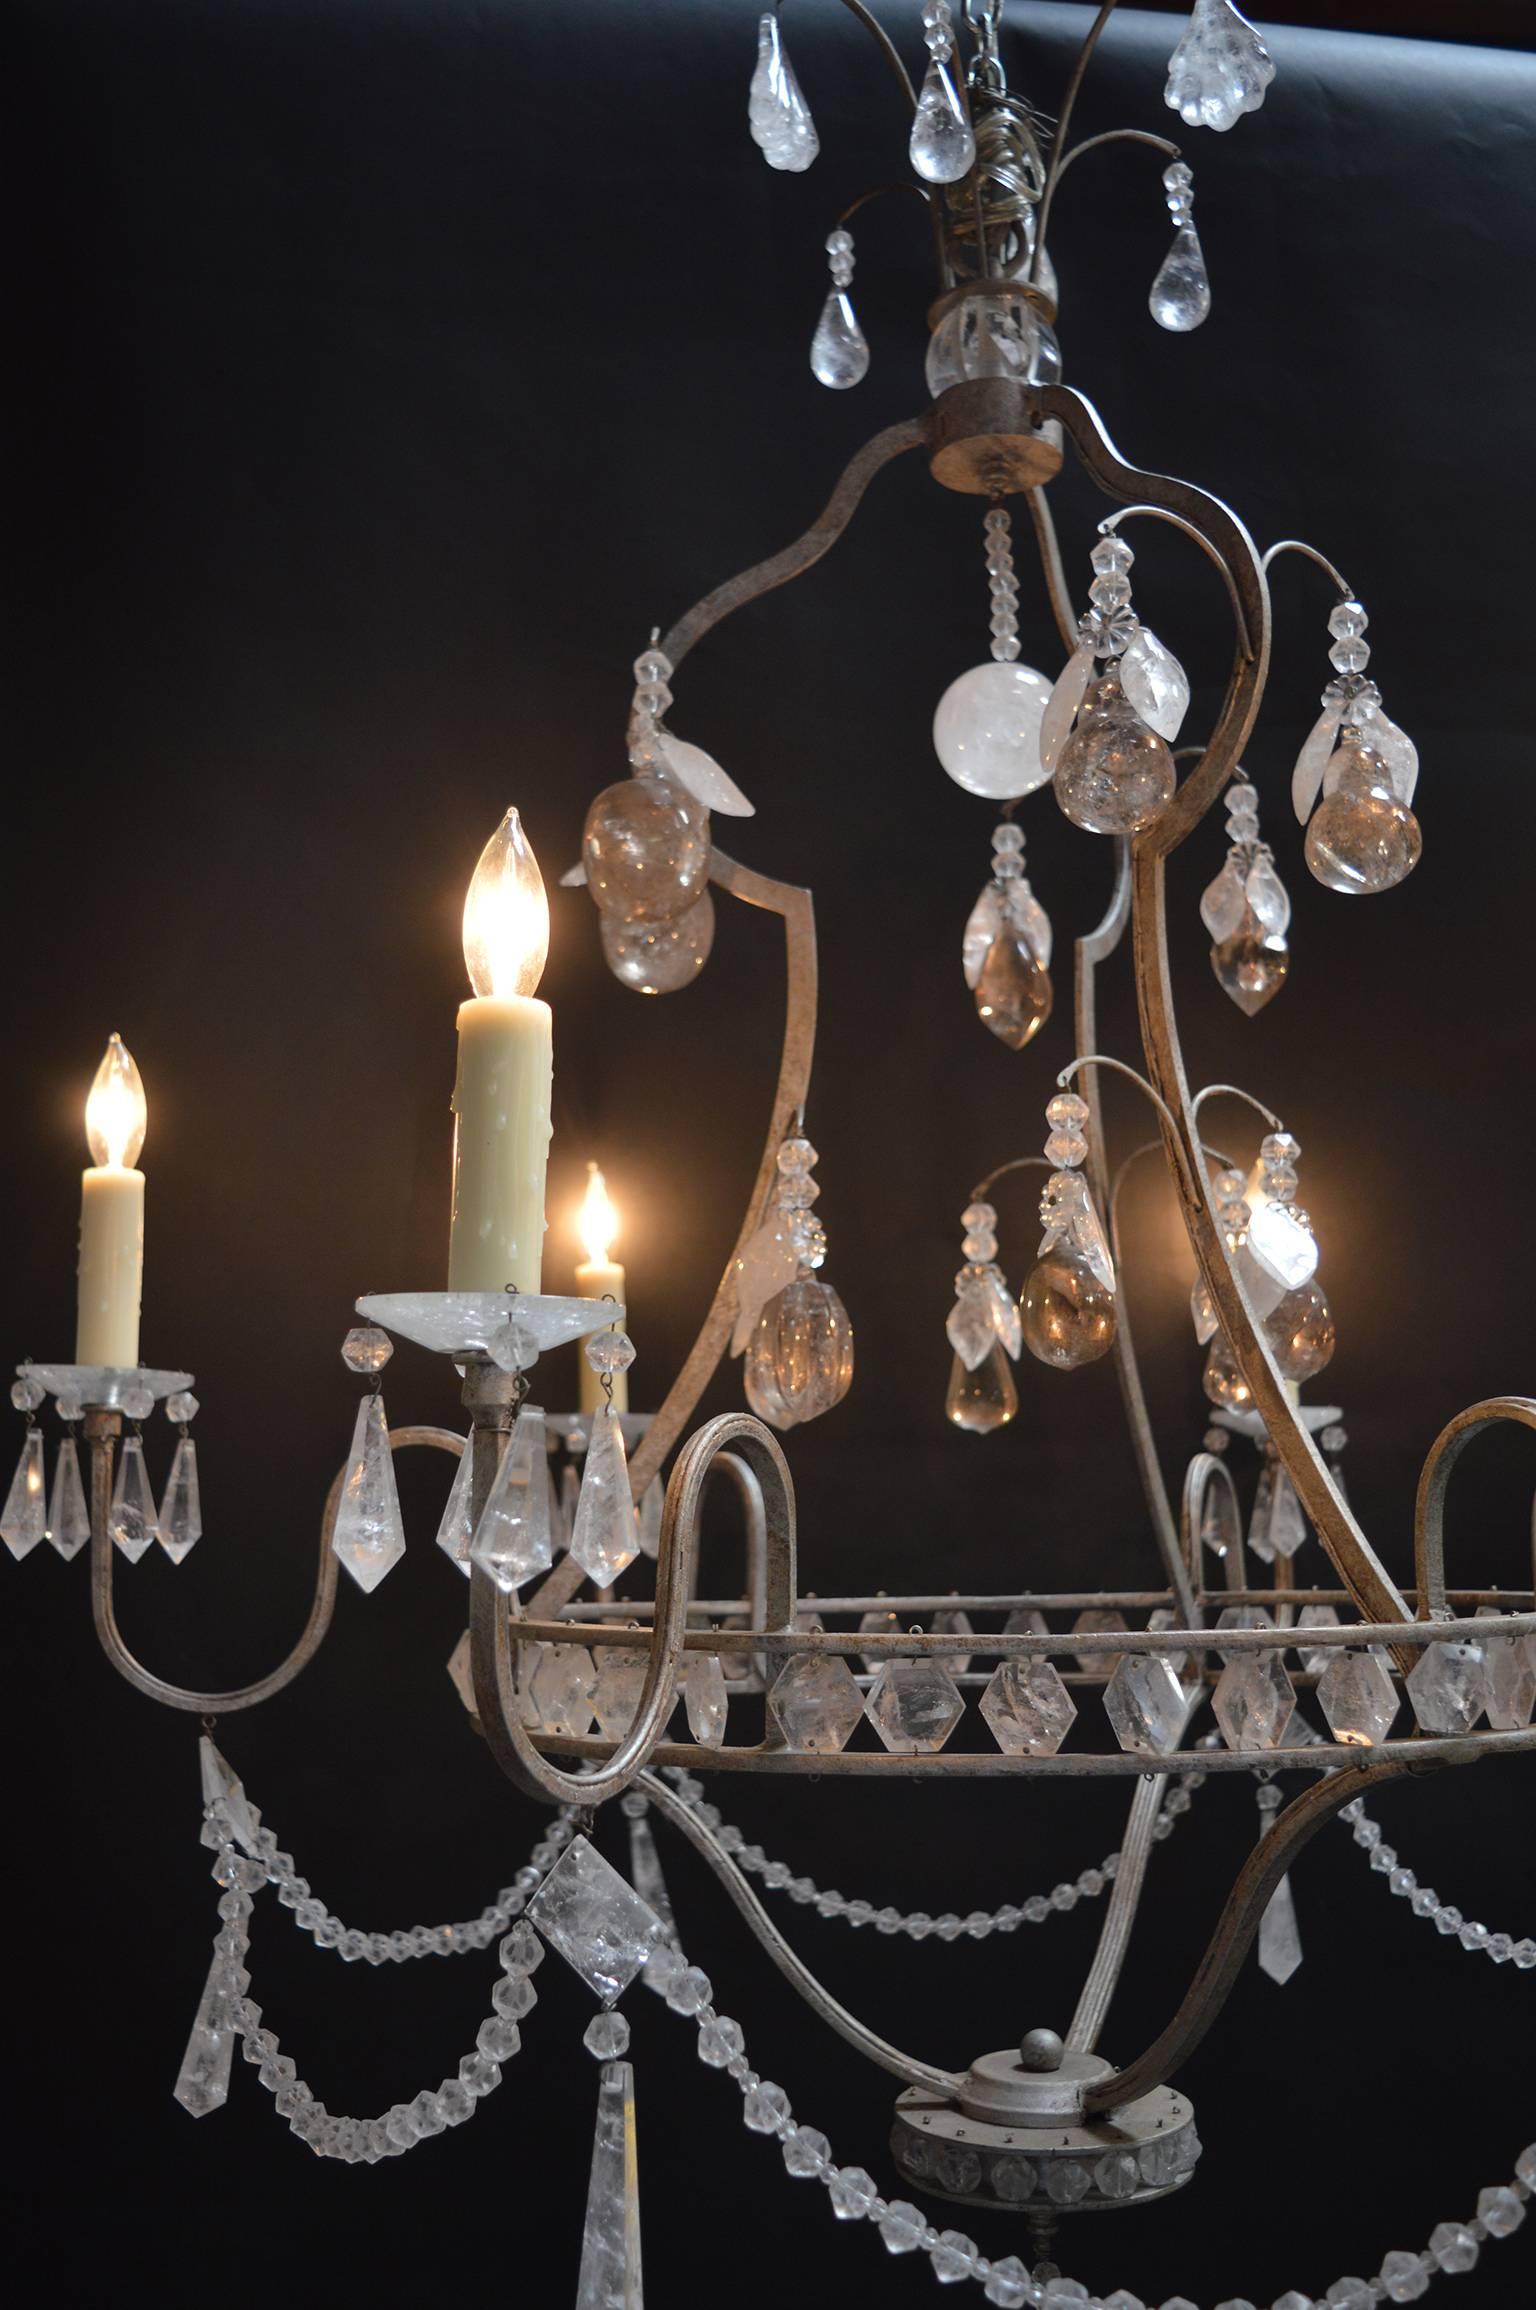 French Rock Crystal Chandelier